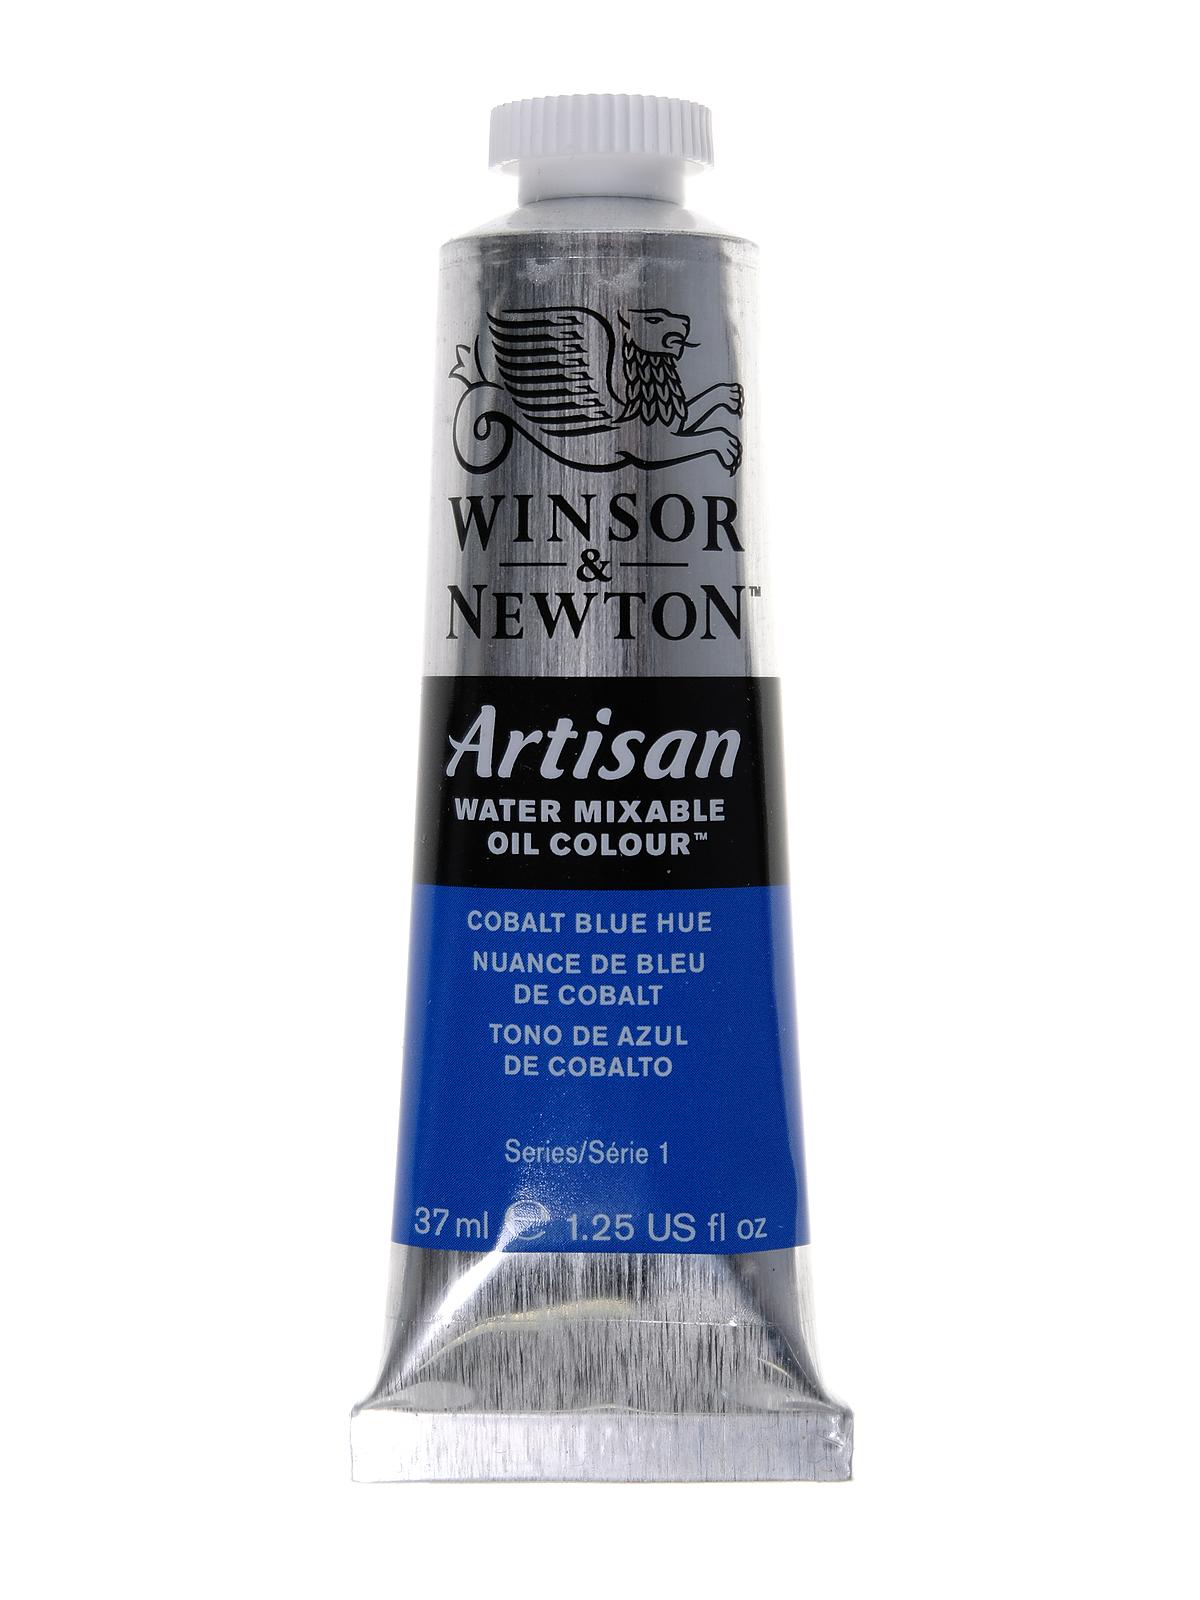 Artisan Water Mixable Oil Colours Cobalt Blue Hue 37 Ml 138